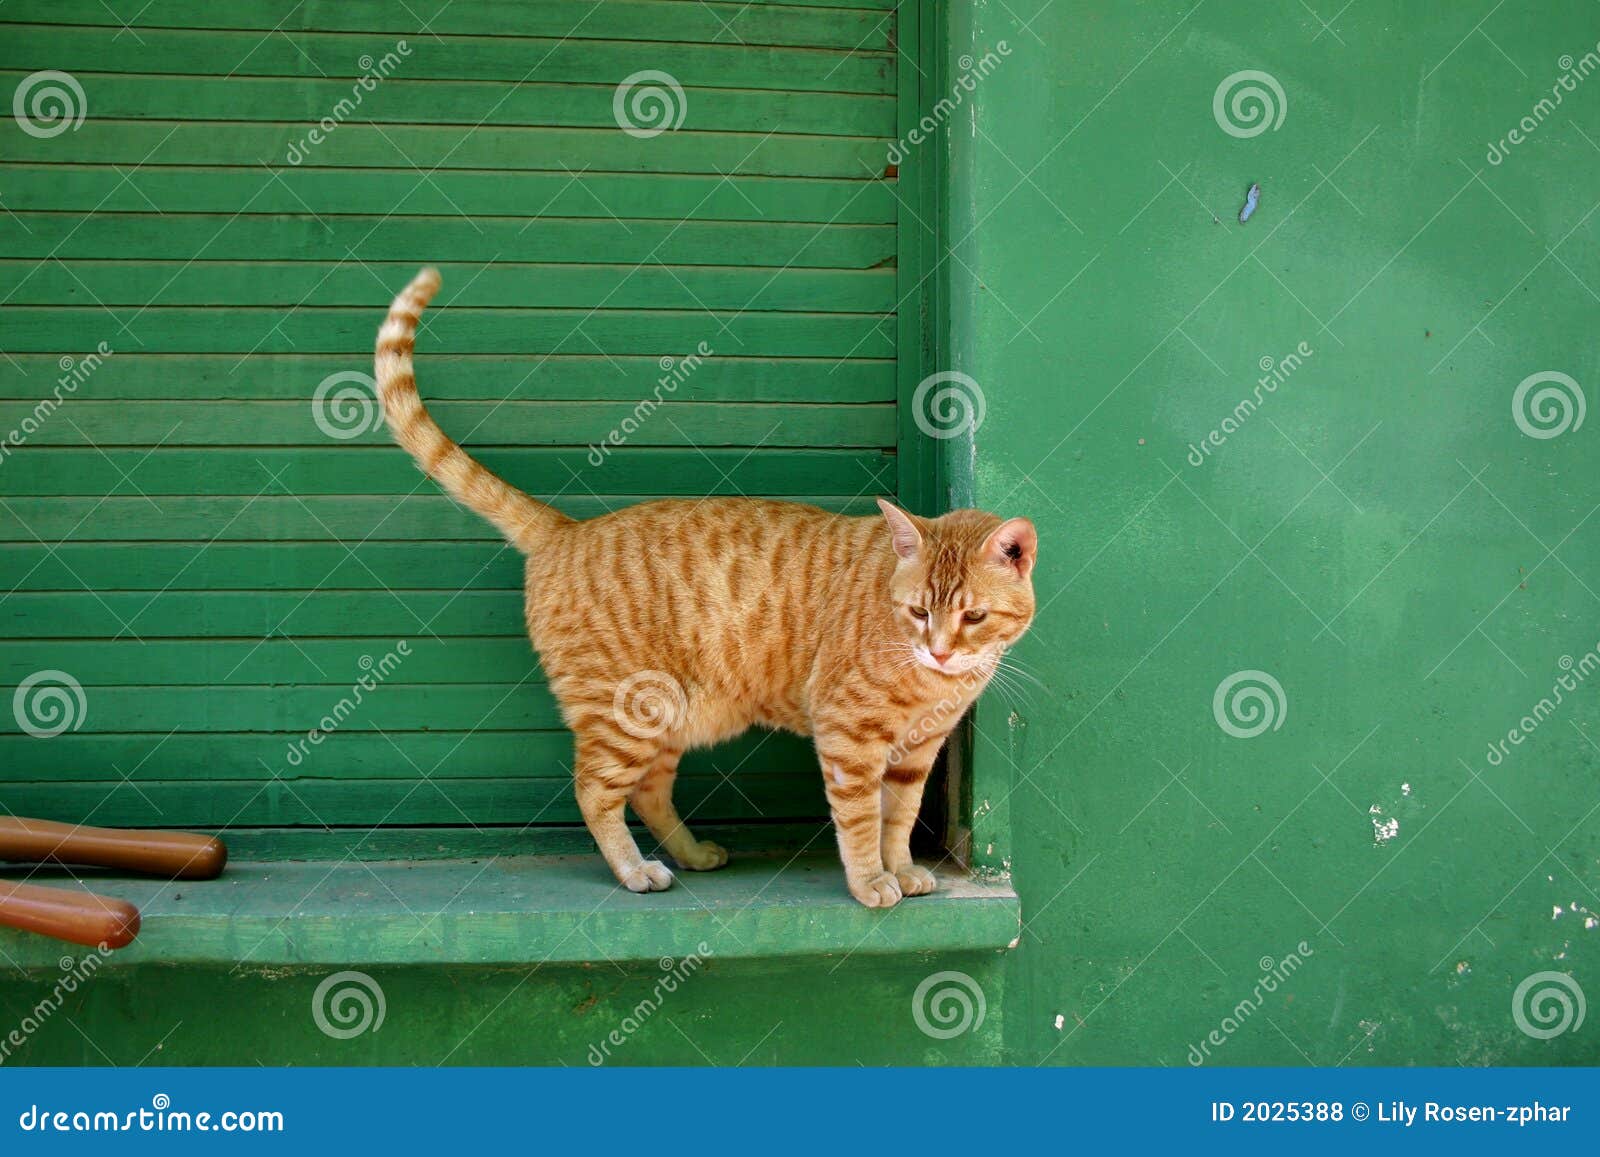 Red hair cat stock photo. Image of housing, shed, residence - 2025388